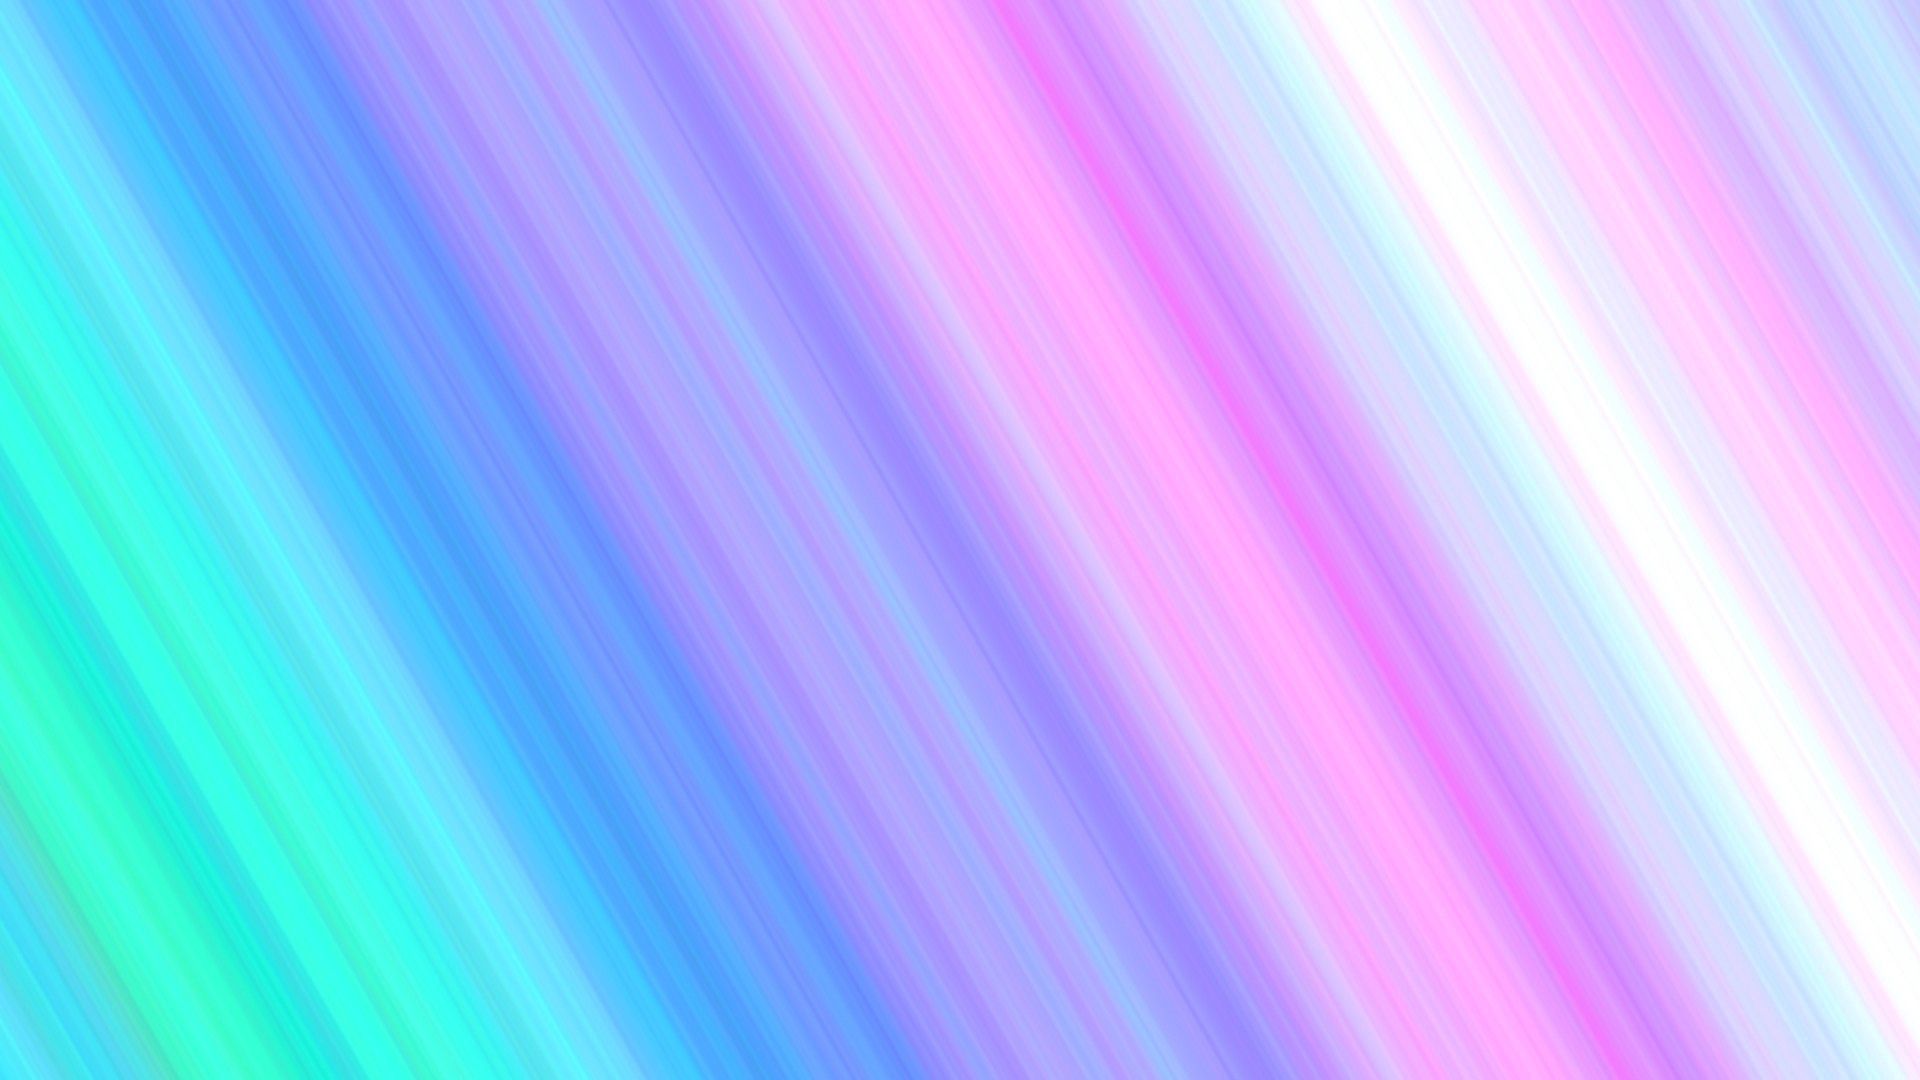 light coloured, abstract, obliquely, light, lines, shades iphone wallpaper